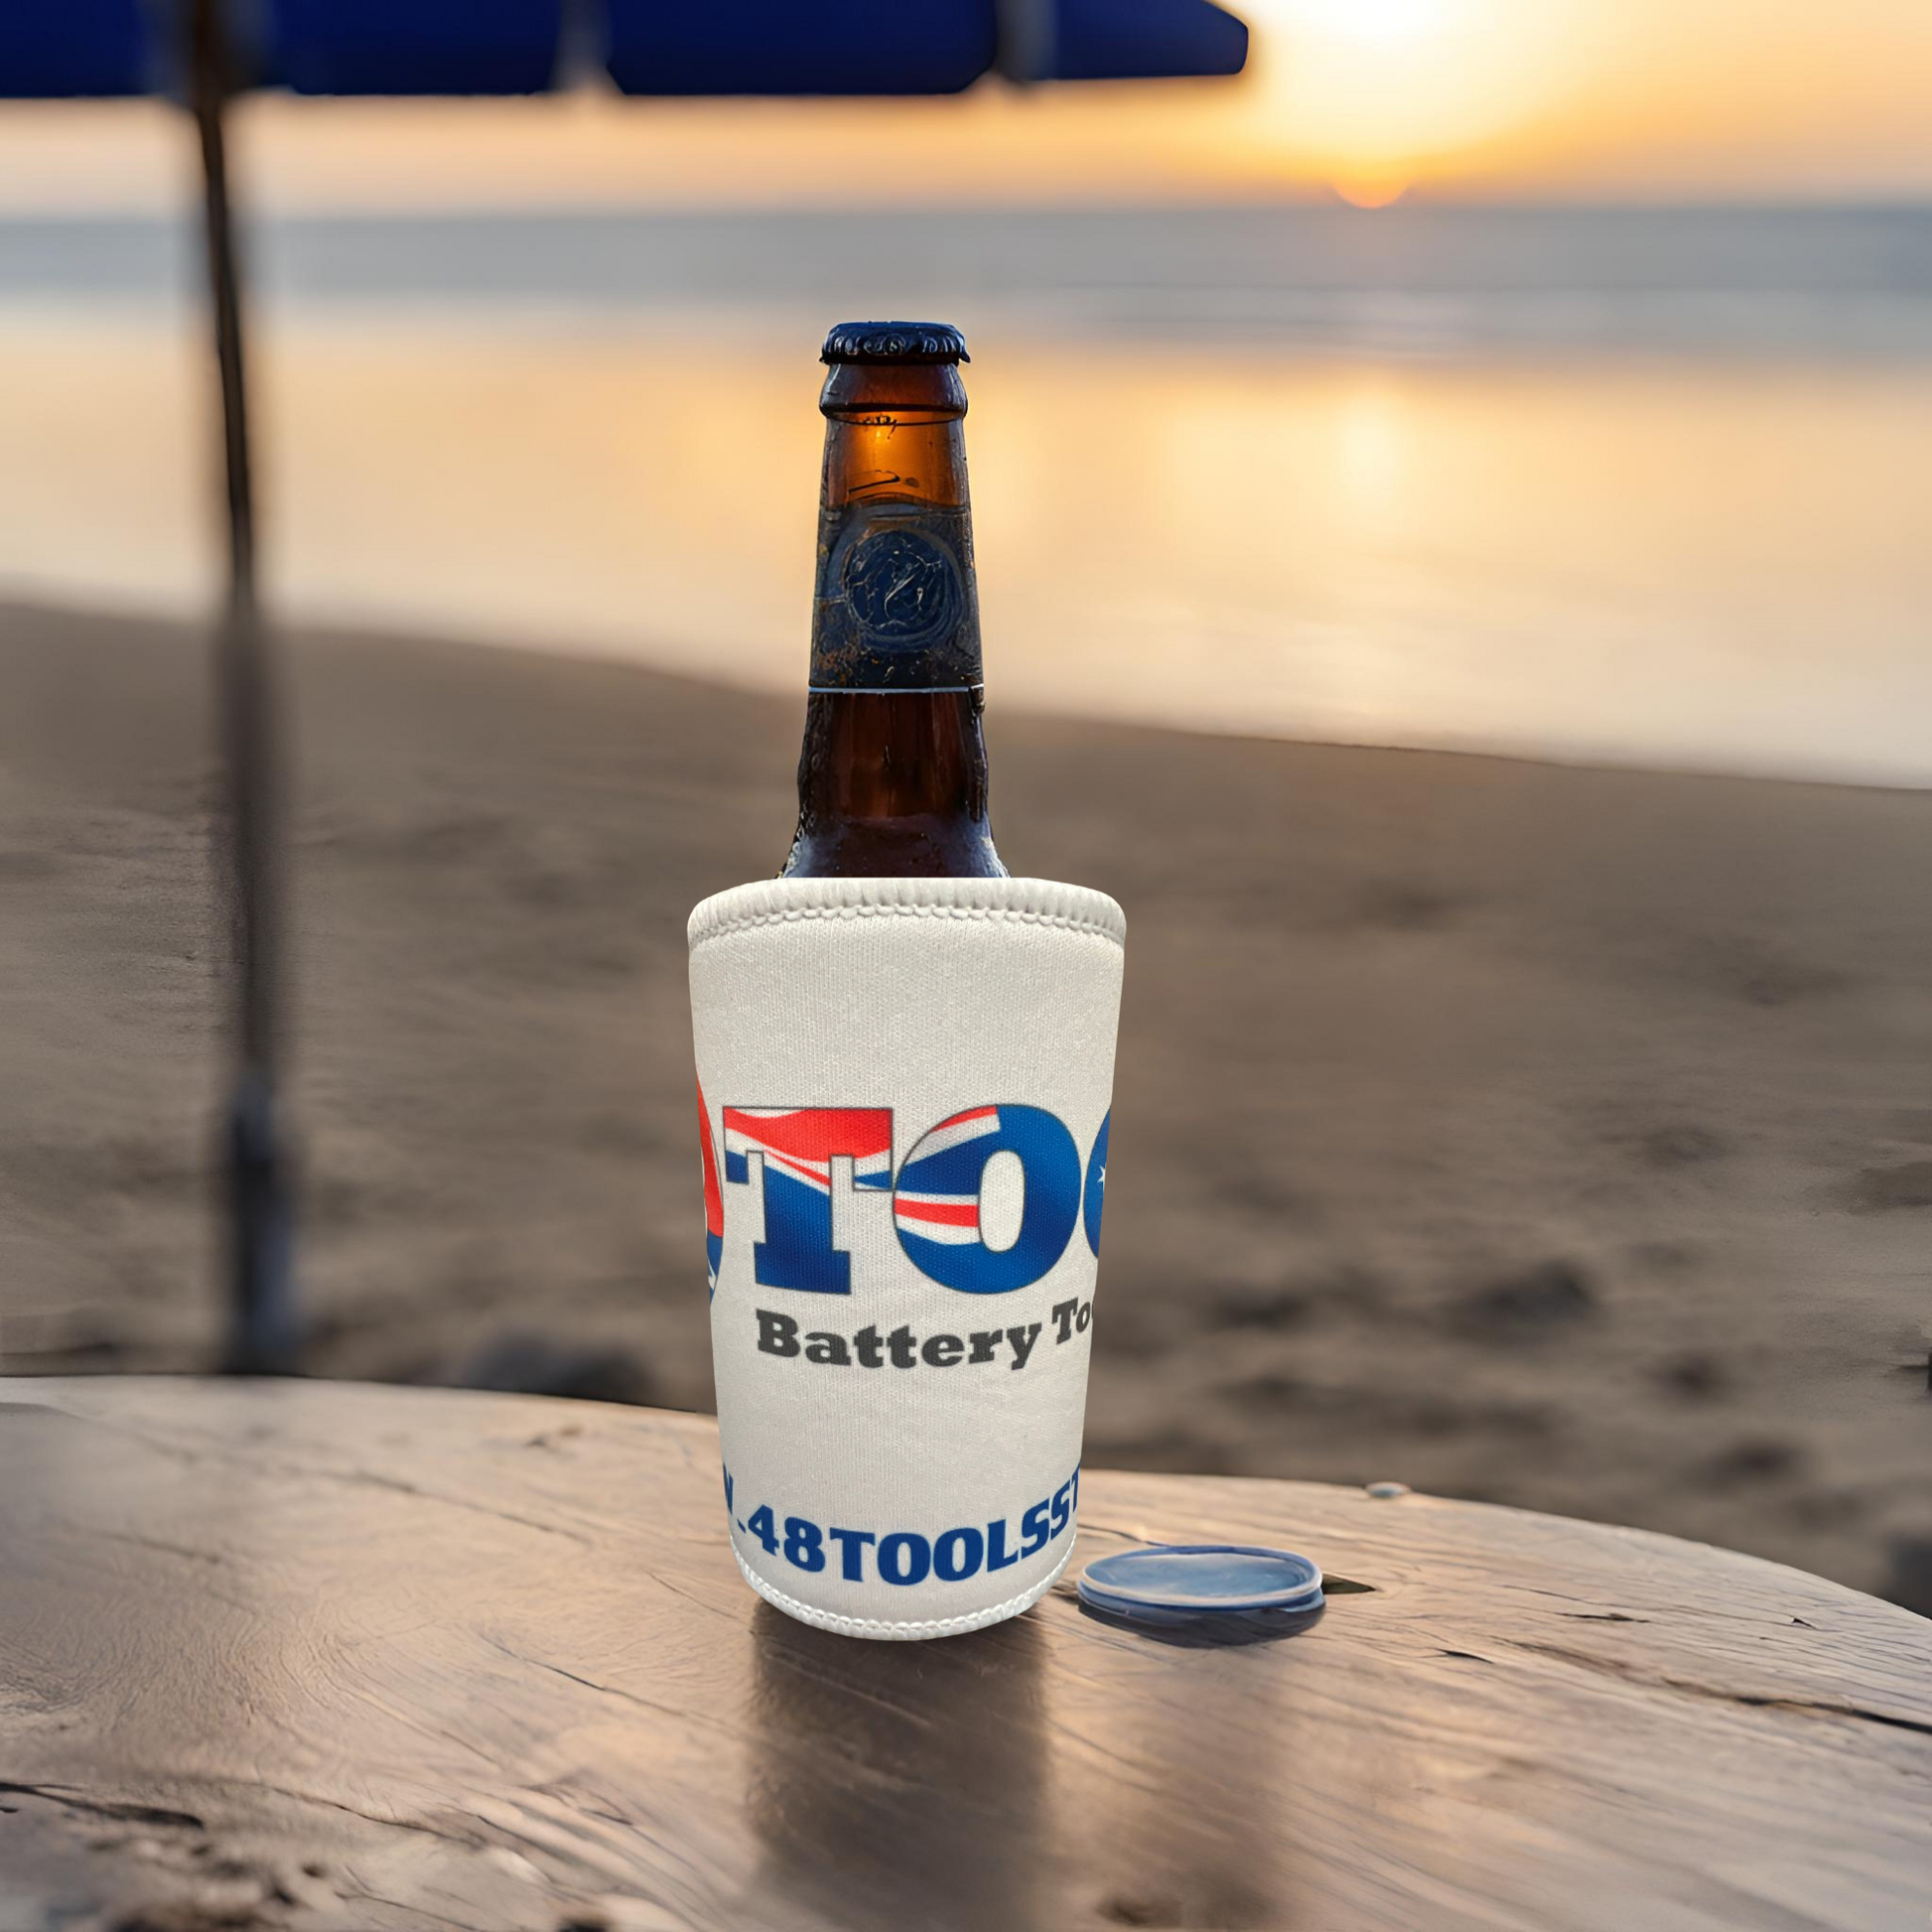 48 Tools drink cool or stubby holder